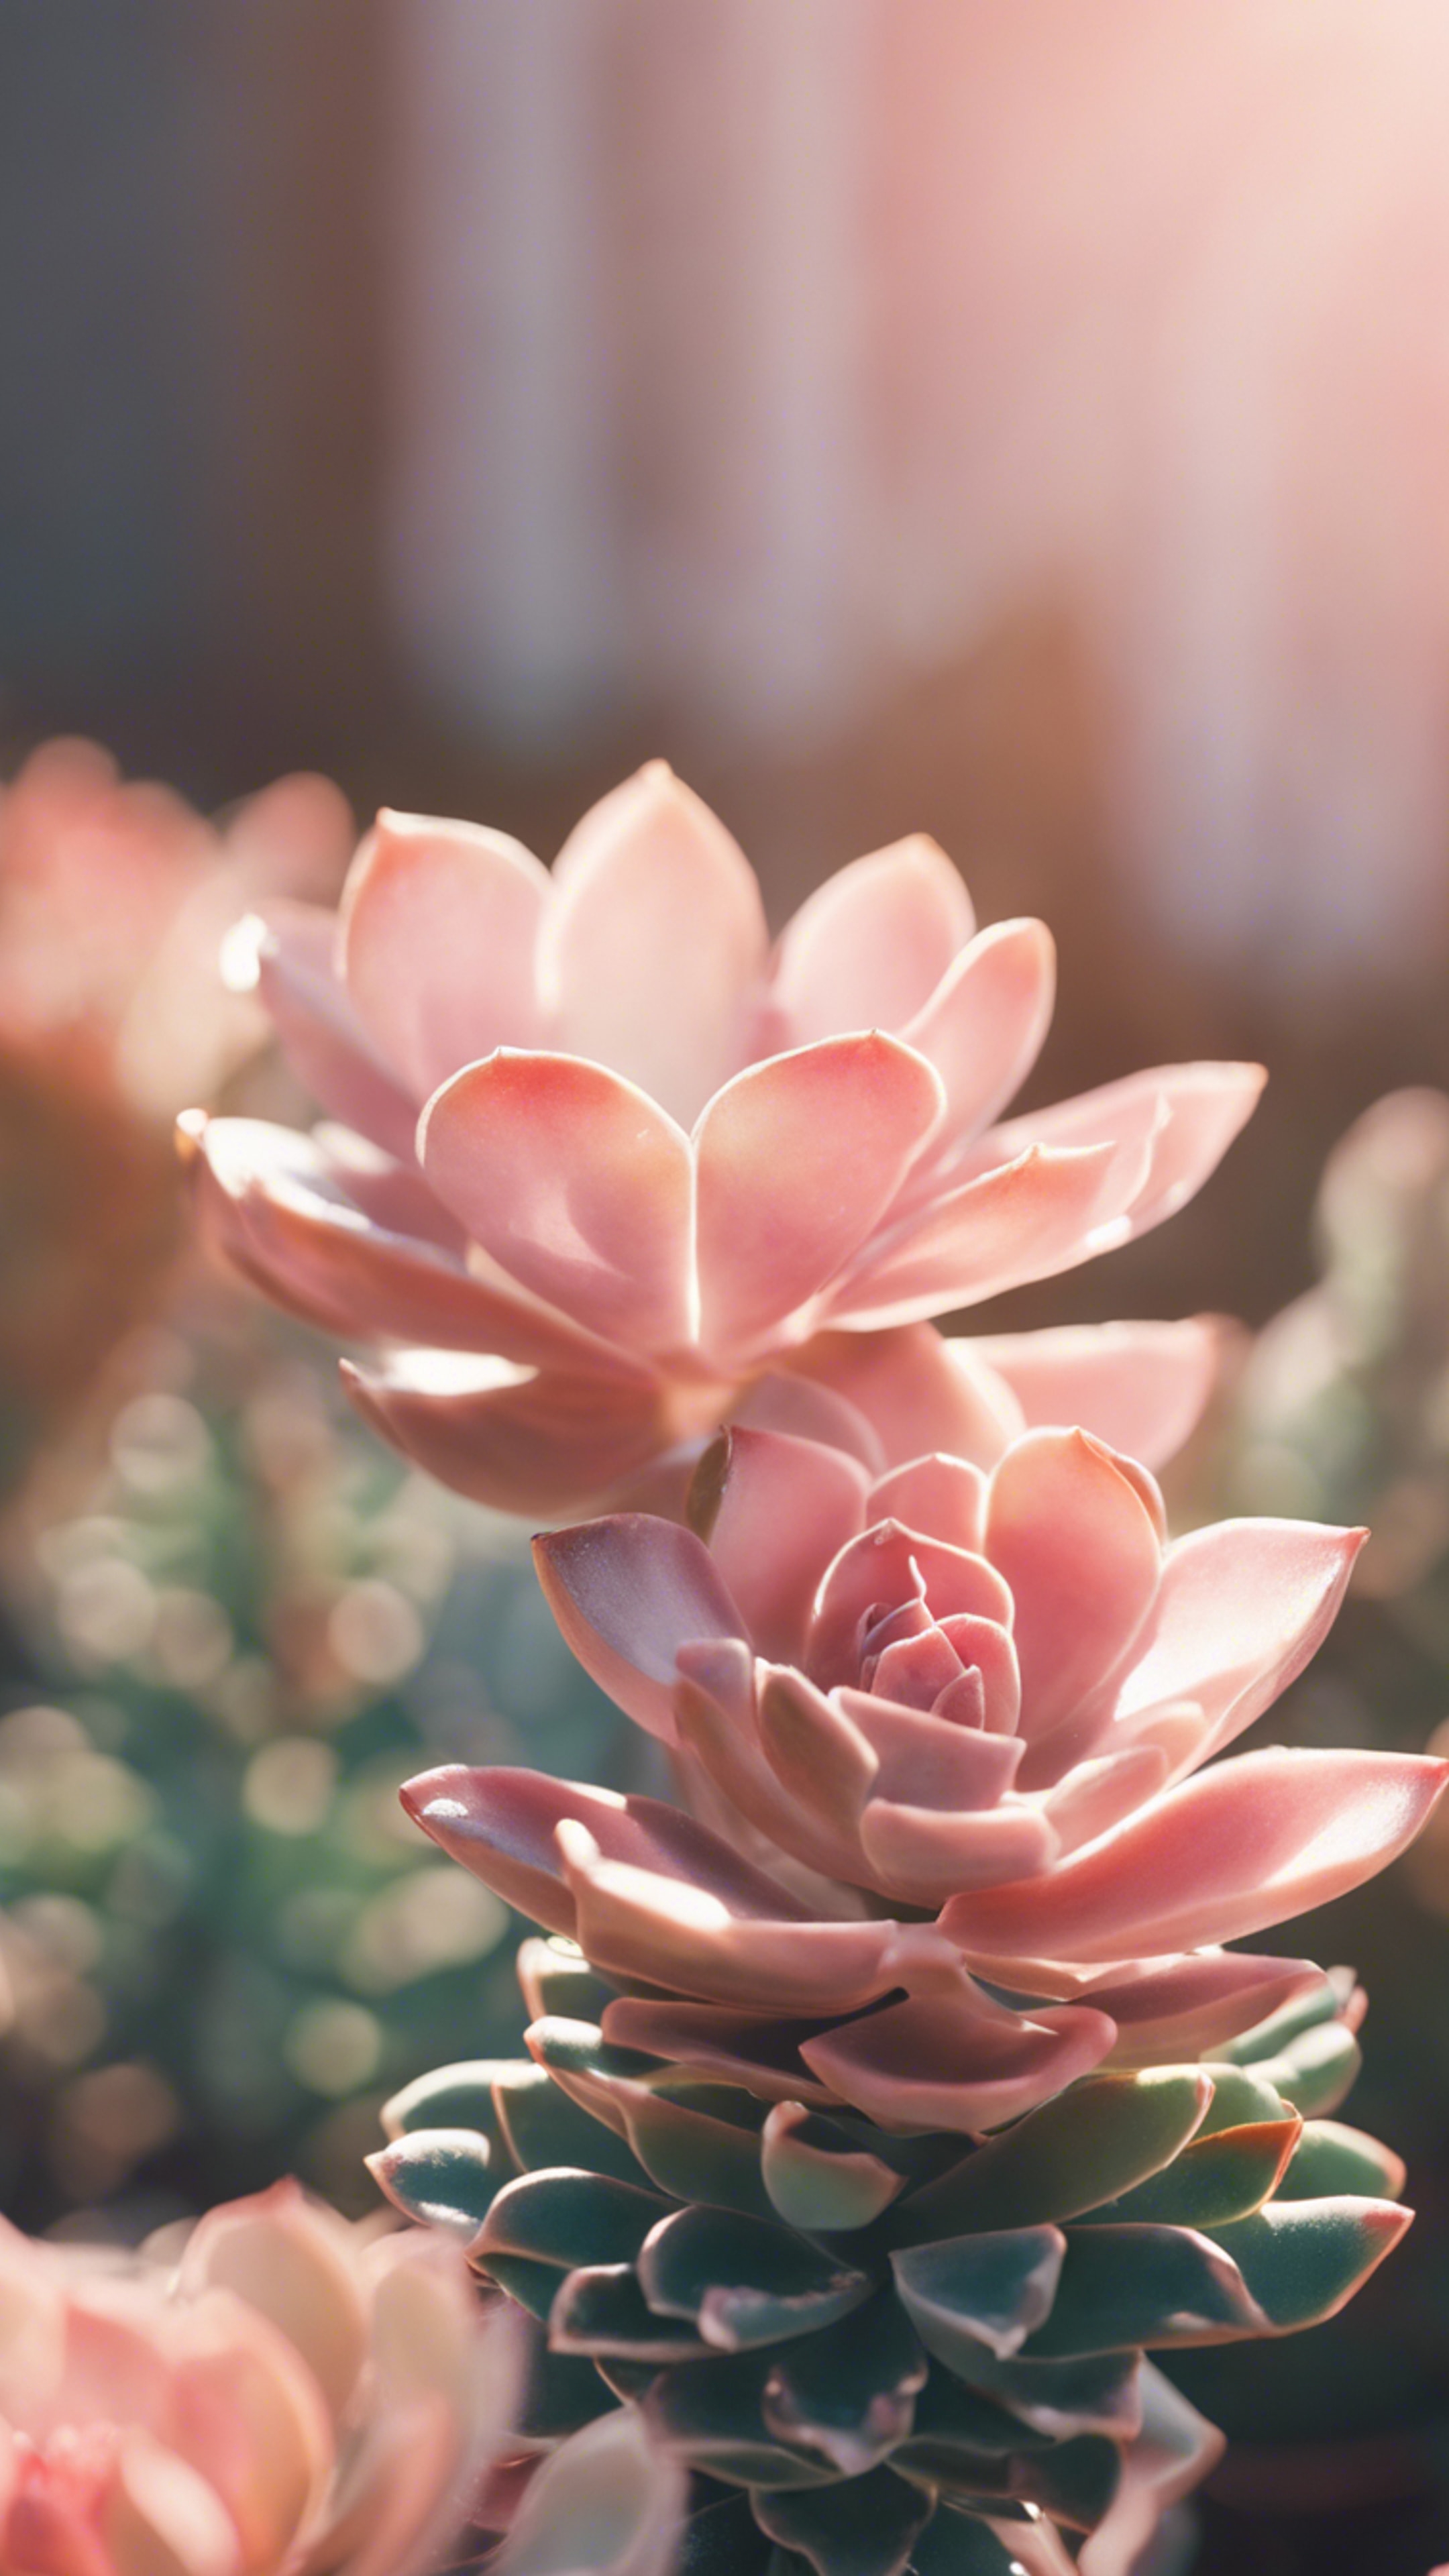 A close-up view of a preppy pastel pink succulent plant bathed in gentle morning sunshine. Hintergrund[96679d4148894c129b05]